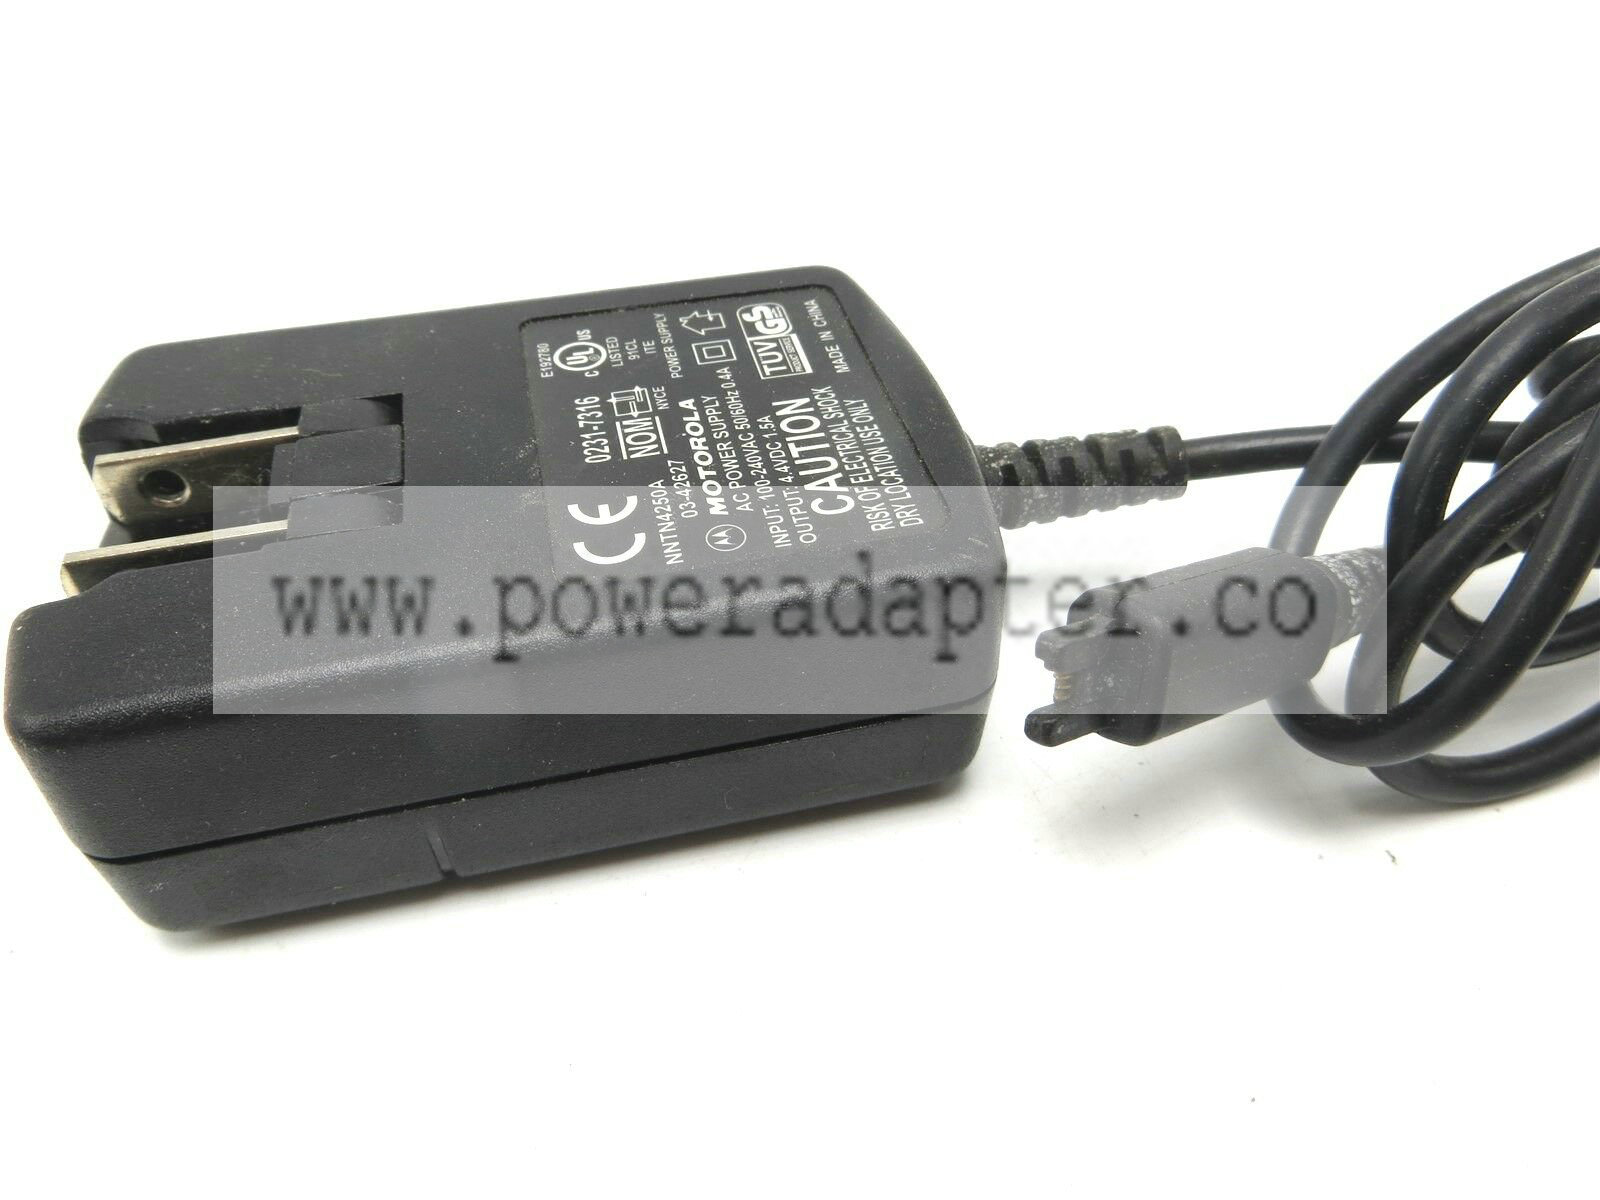 Motorola AC Power Supply Adapter Output 4.4VDC 1.5A Motorola AC Power Supply Adapter Output 4.4VDC 1.5A. In good cond - Click Image to Close